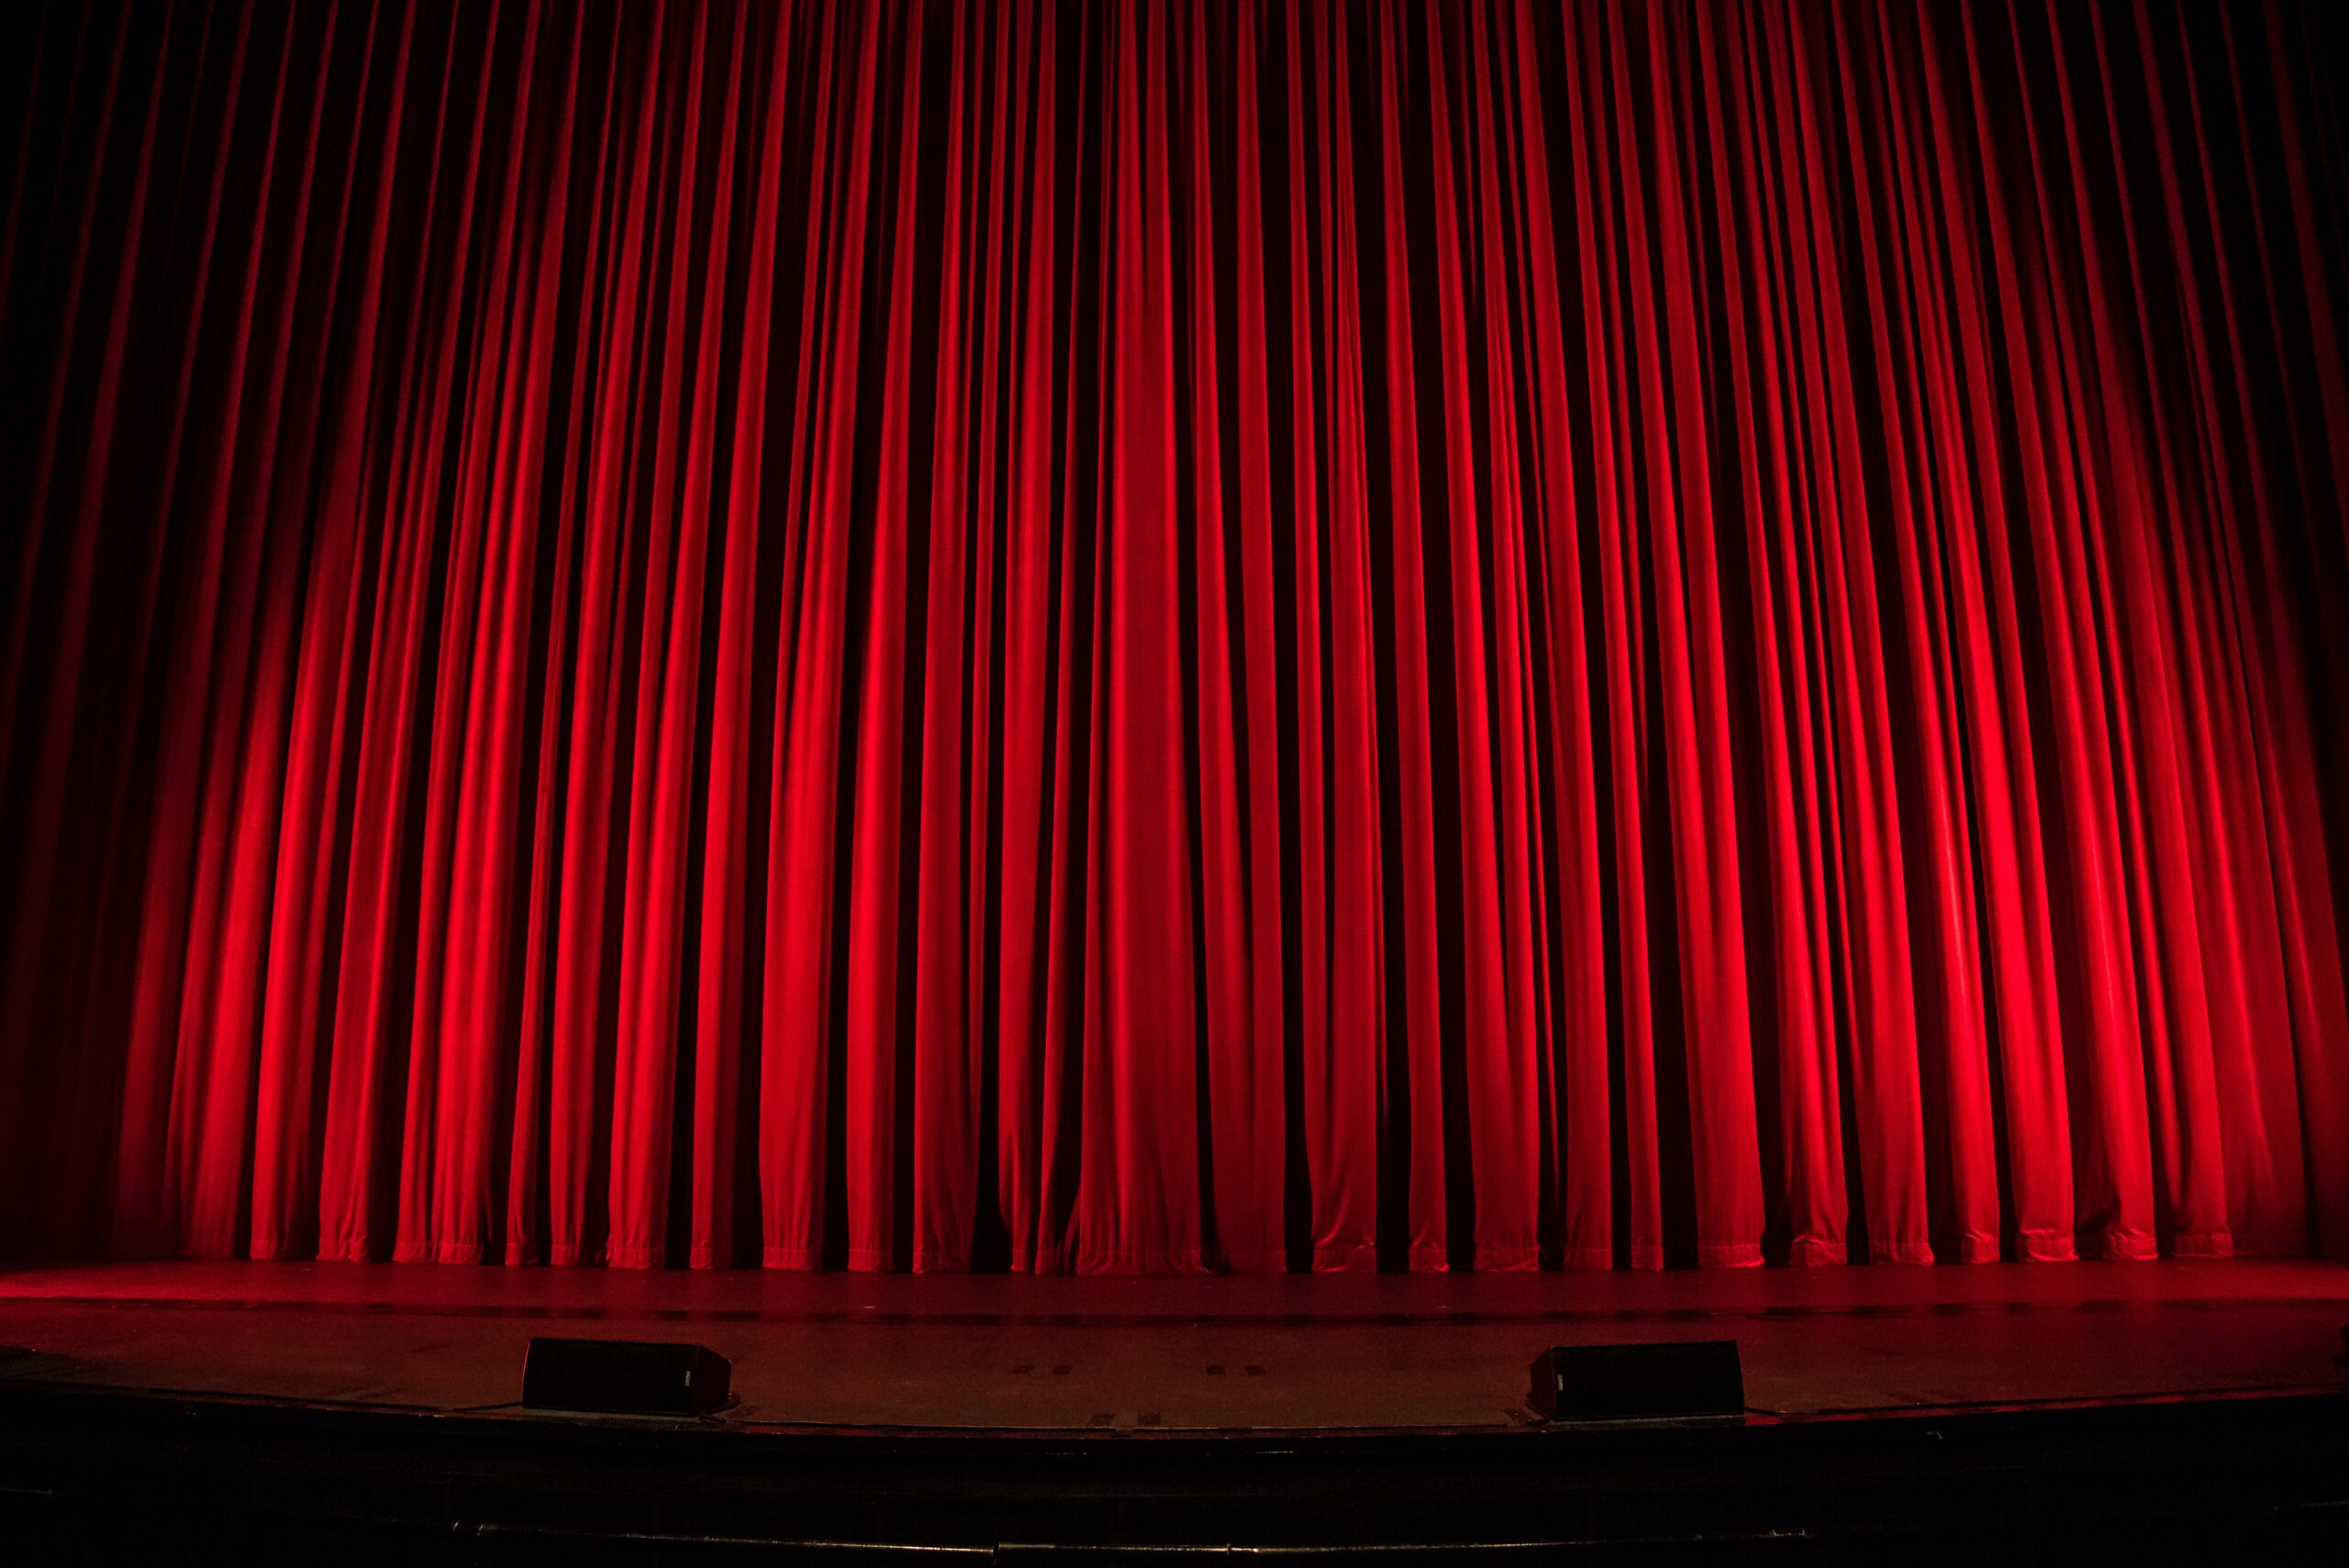 A picture of red theatre curtains